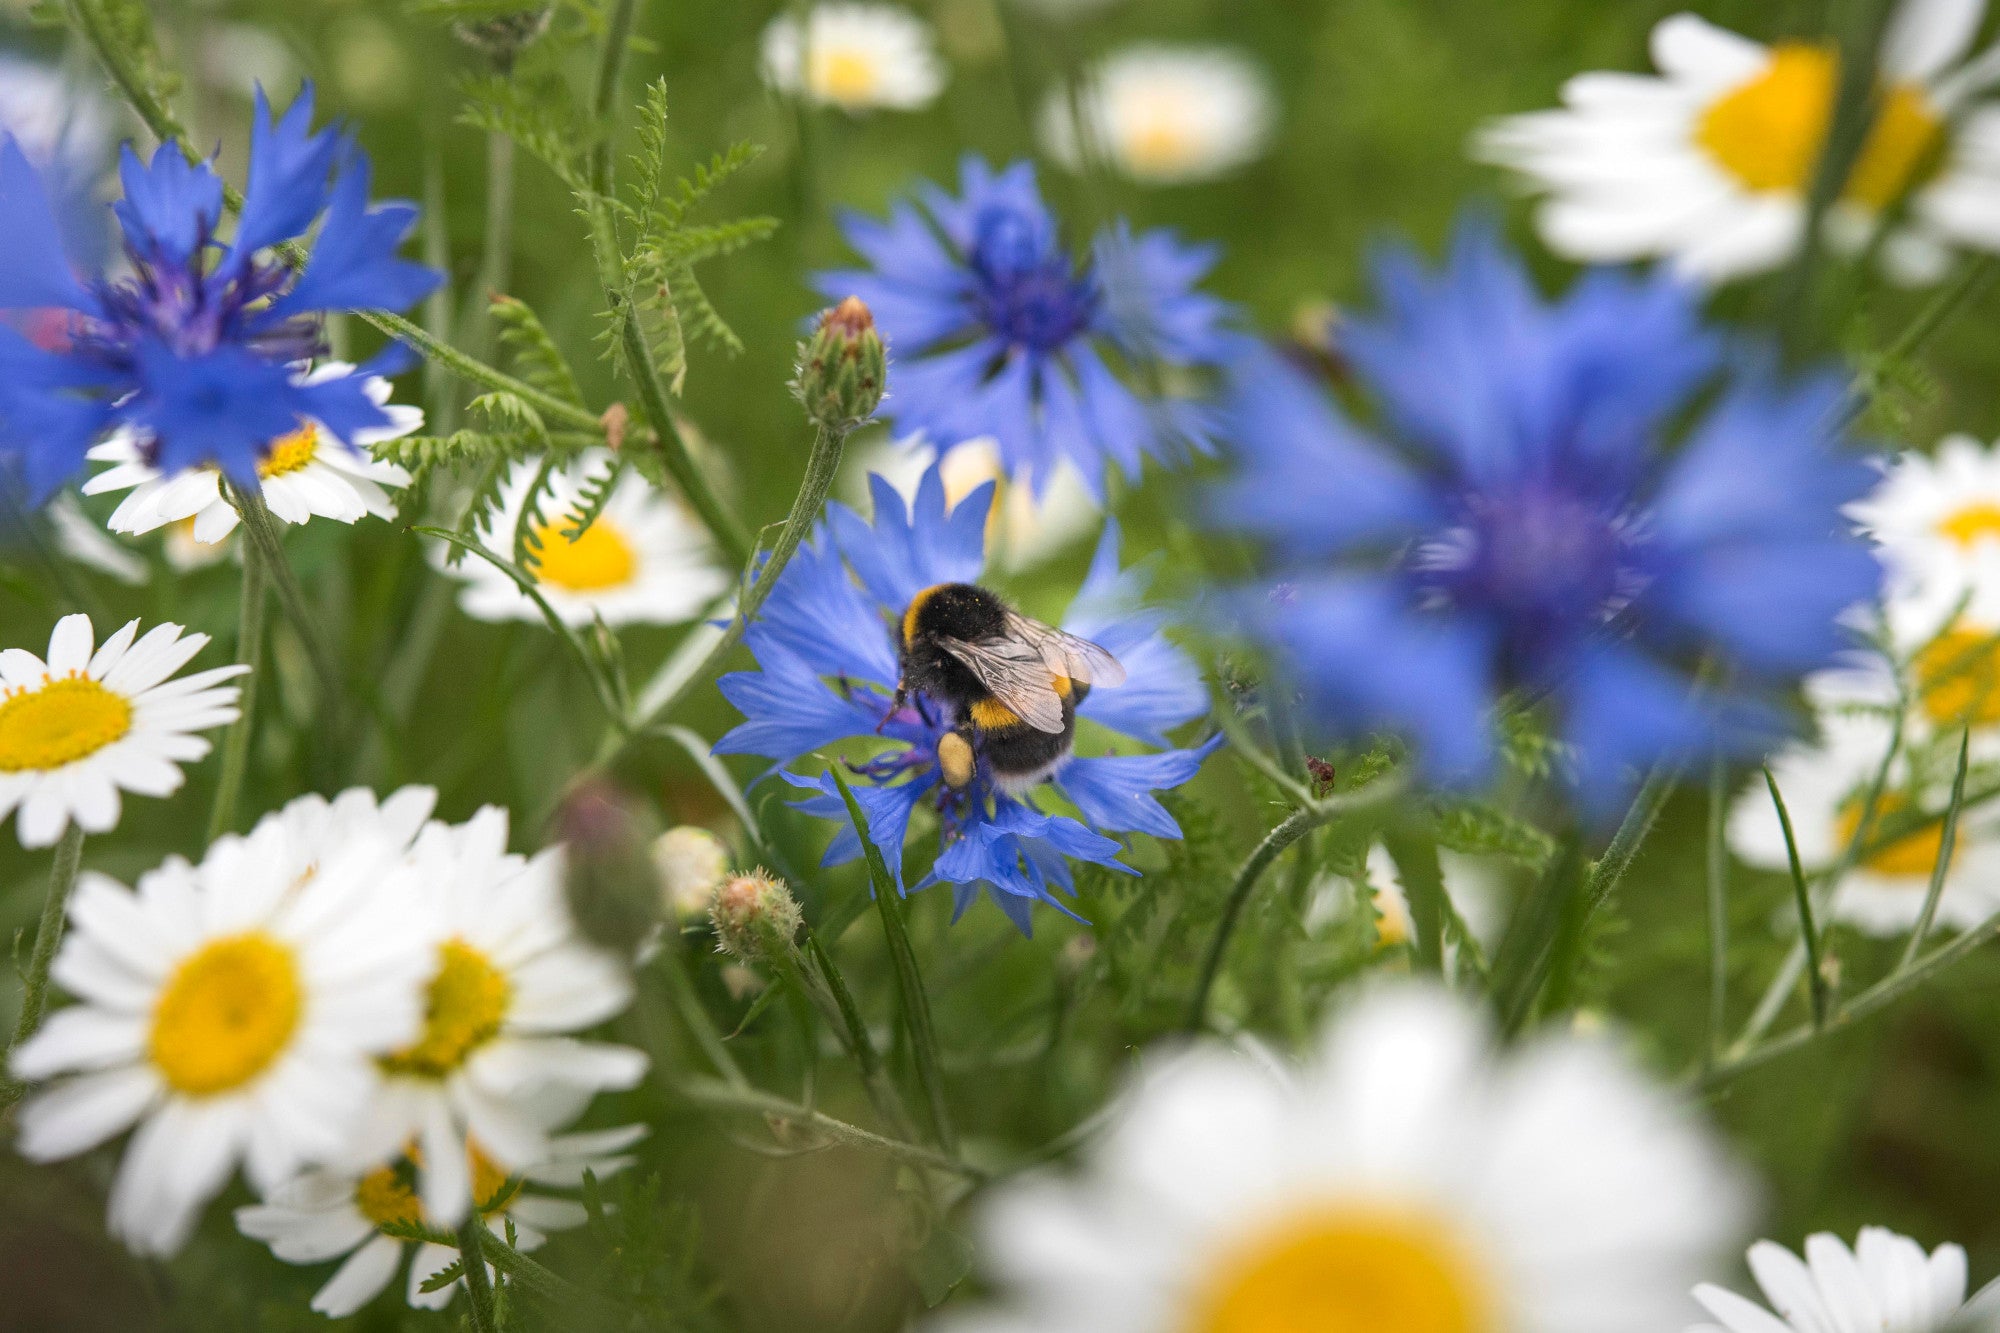 Eco-friendly gardening tips: How to grow your own wildflower meadow